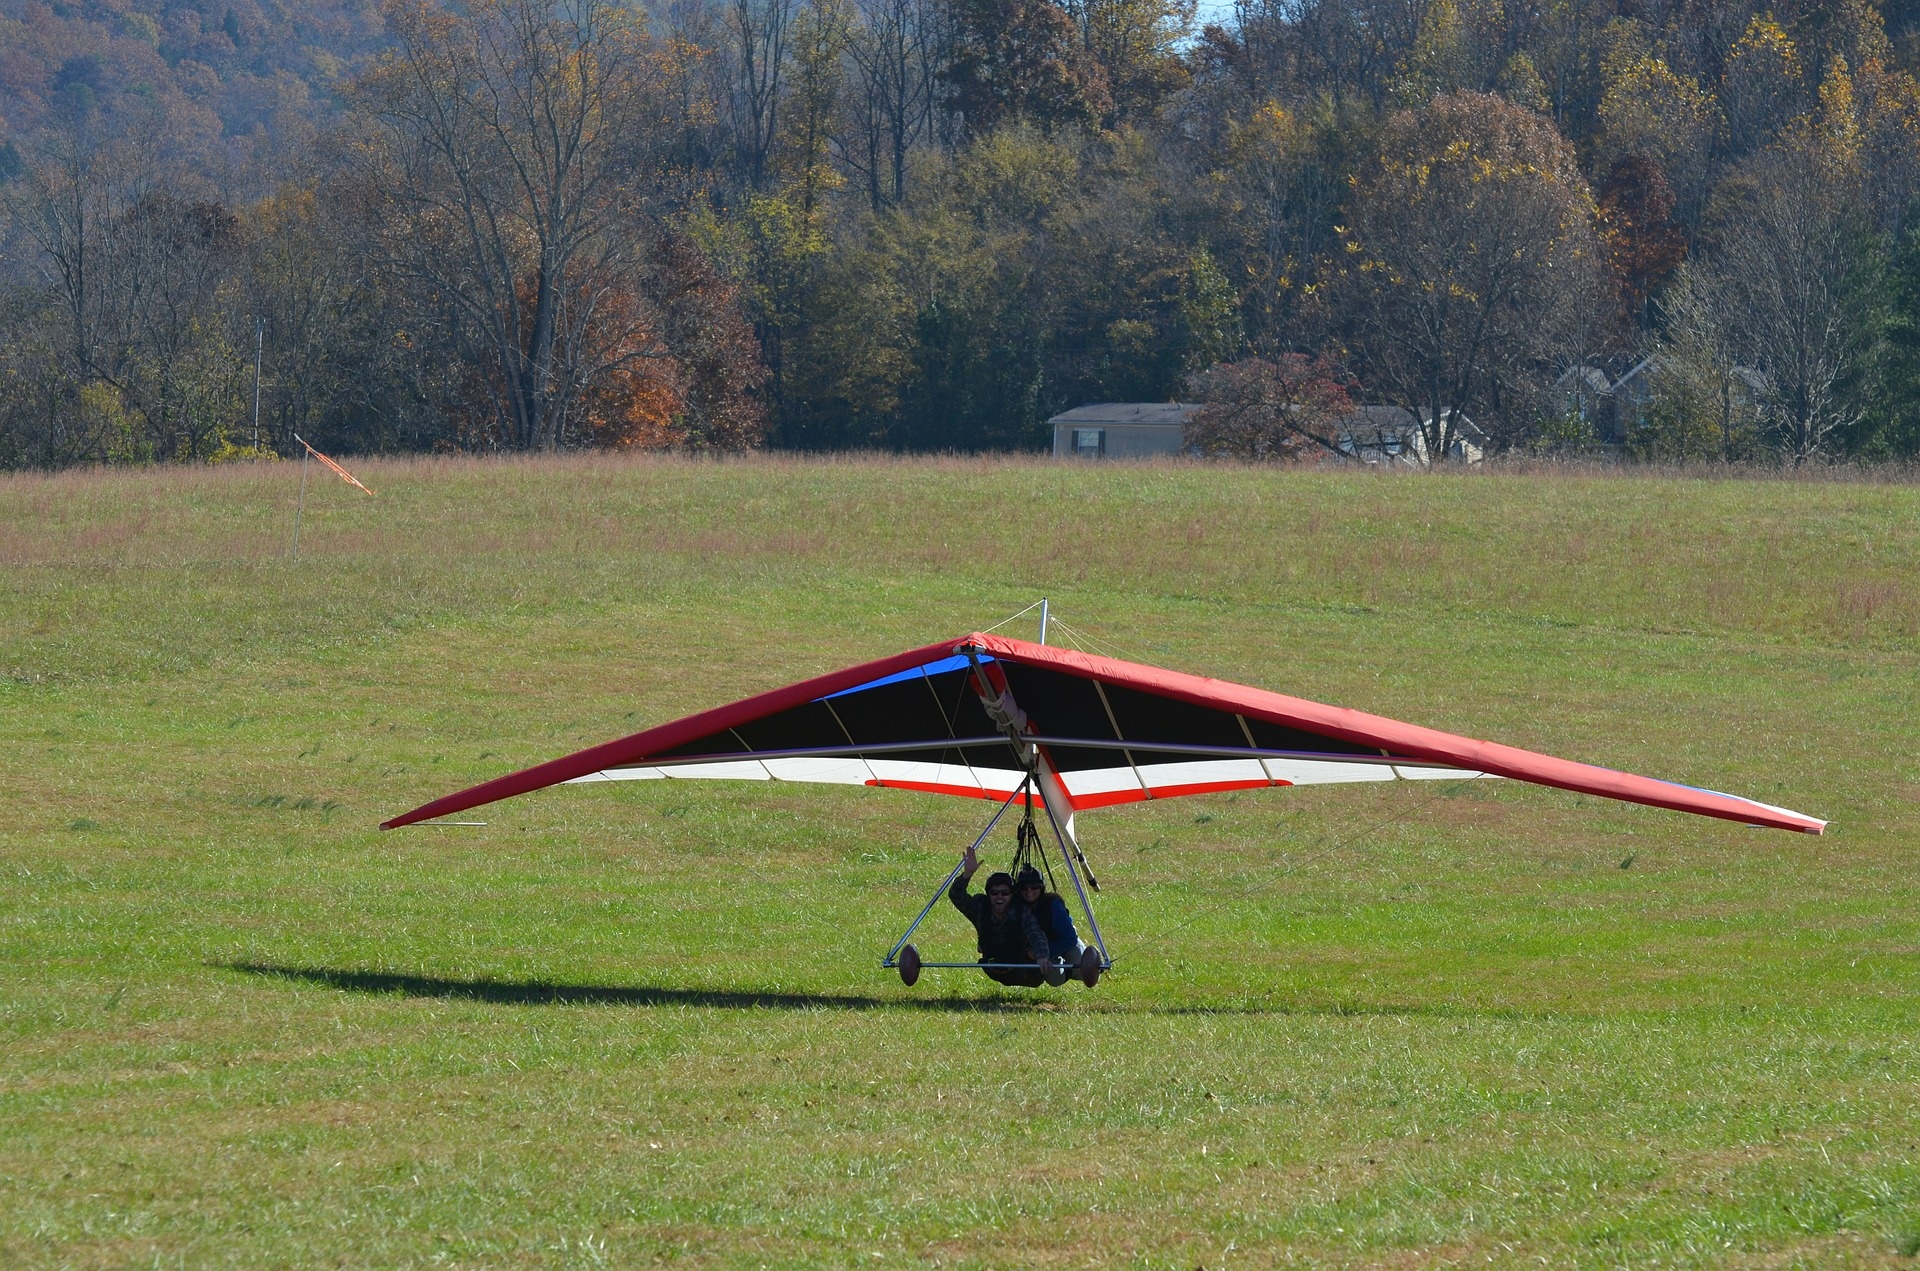 Hang Gliding: The basics of landing, An experienced instructor, U.S. Hang Gliding and Paragliding Association. 1920x1280 HD Wallpaper.